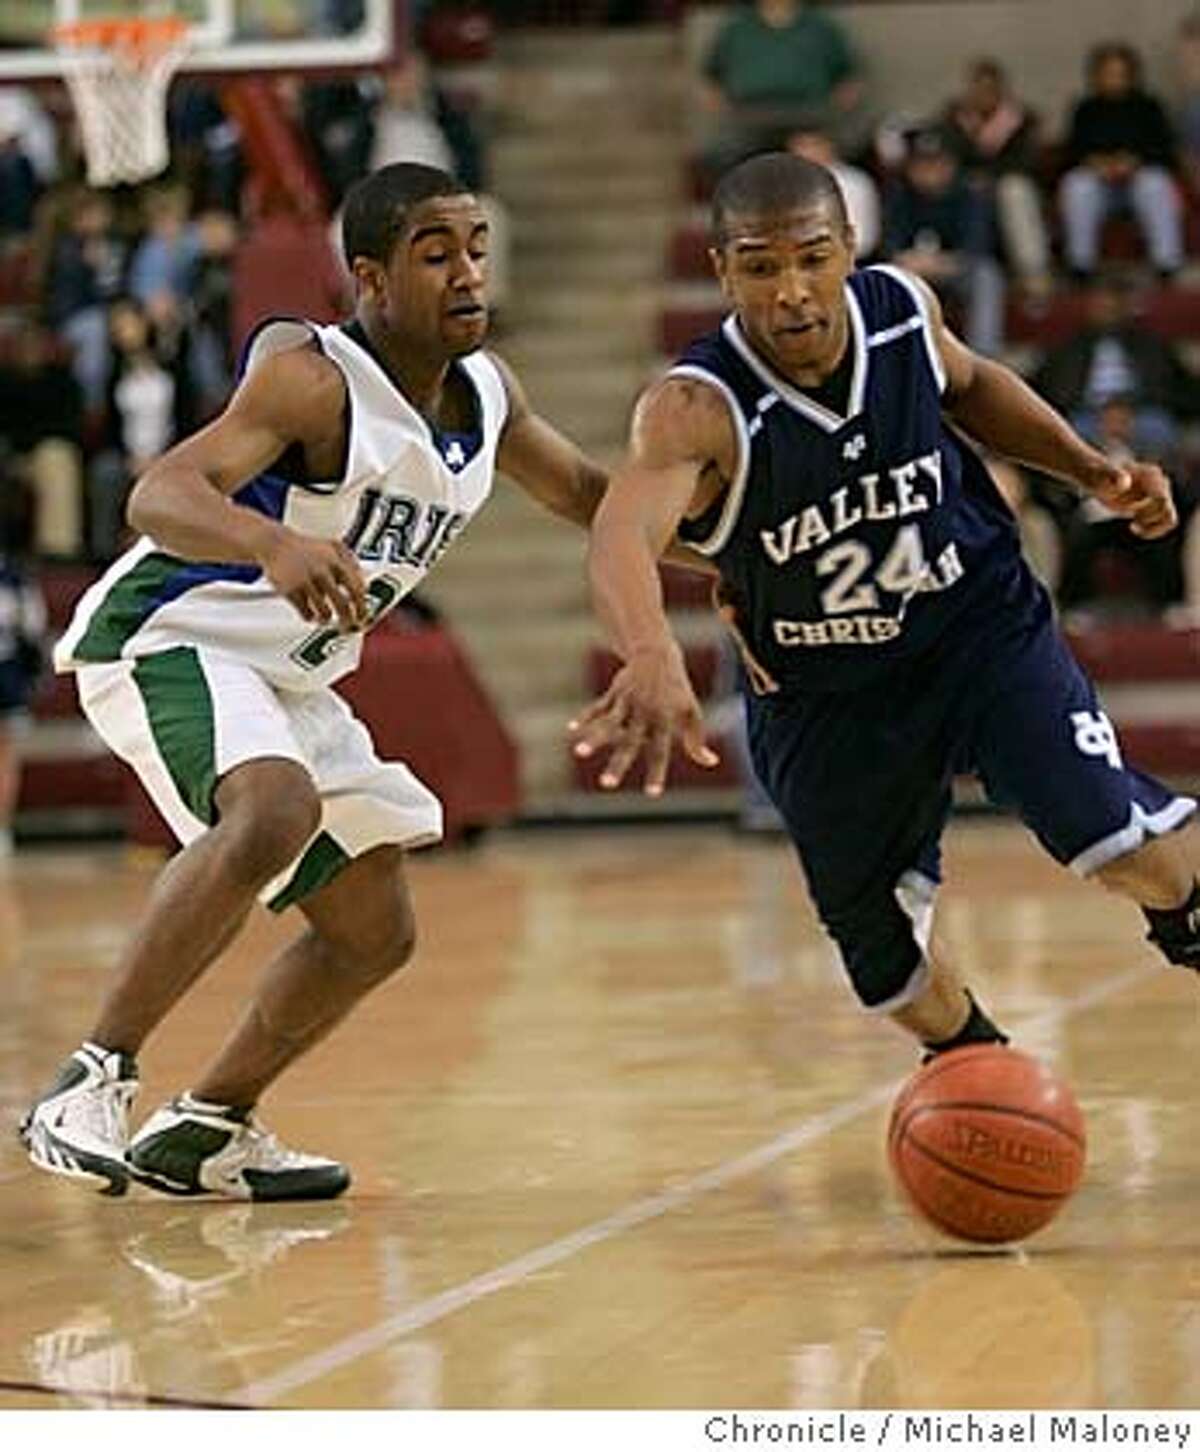 BOYS04_246_MJM.jpg Valley Christian's #24 (right) Terrence Worthy drives against Sacred Heart Cathedral's Emil Yeargin. Sacred Heart Cathedral vs Valley Christian for the CCS Division 4 championship. Competition was held at the Leavey Center on the Santa Clara University campus. Photo by Michael Maloney / San Francisco Chronicle on 3/3/06 in Santa Clara,CARan on: 03-04-2006 Terrence Worthy, drives around Sacred Heart Cathedrals Emil Yeargin.Ran on: 03-04-2006 Terrence Worthy drives around Sacred Heart Cathedrals Emil Yeargin.Ran on: 03-04-2006